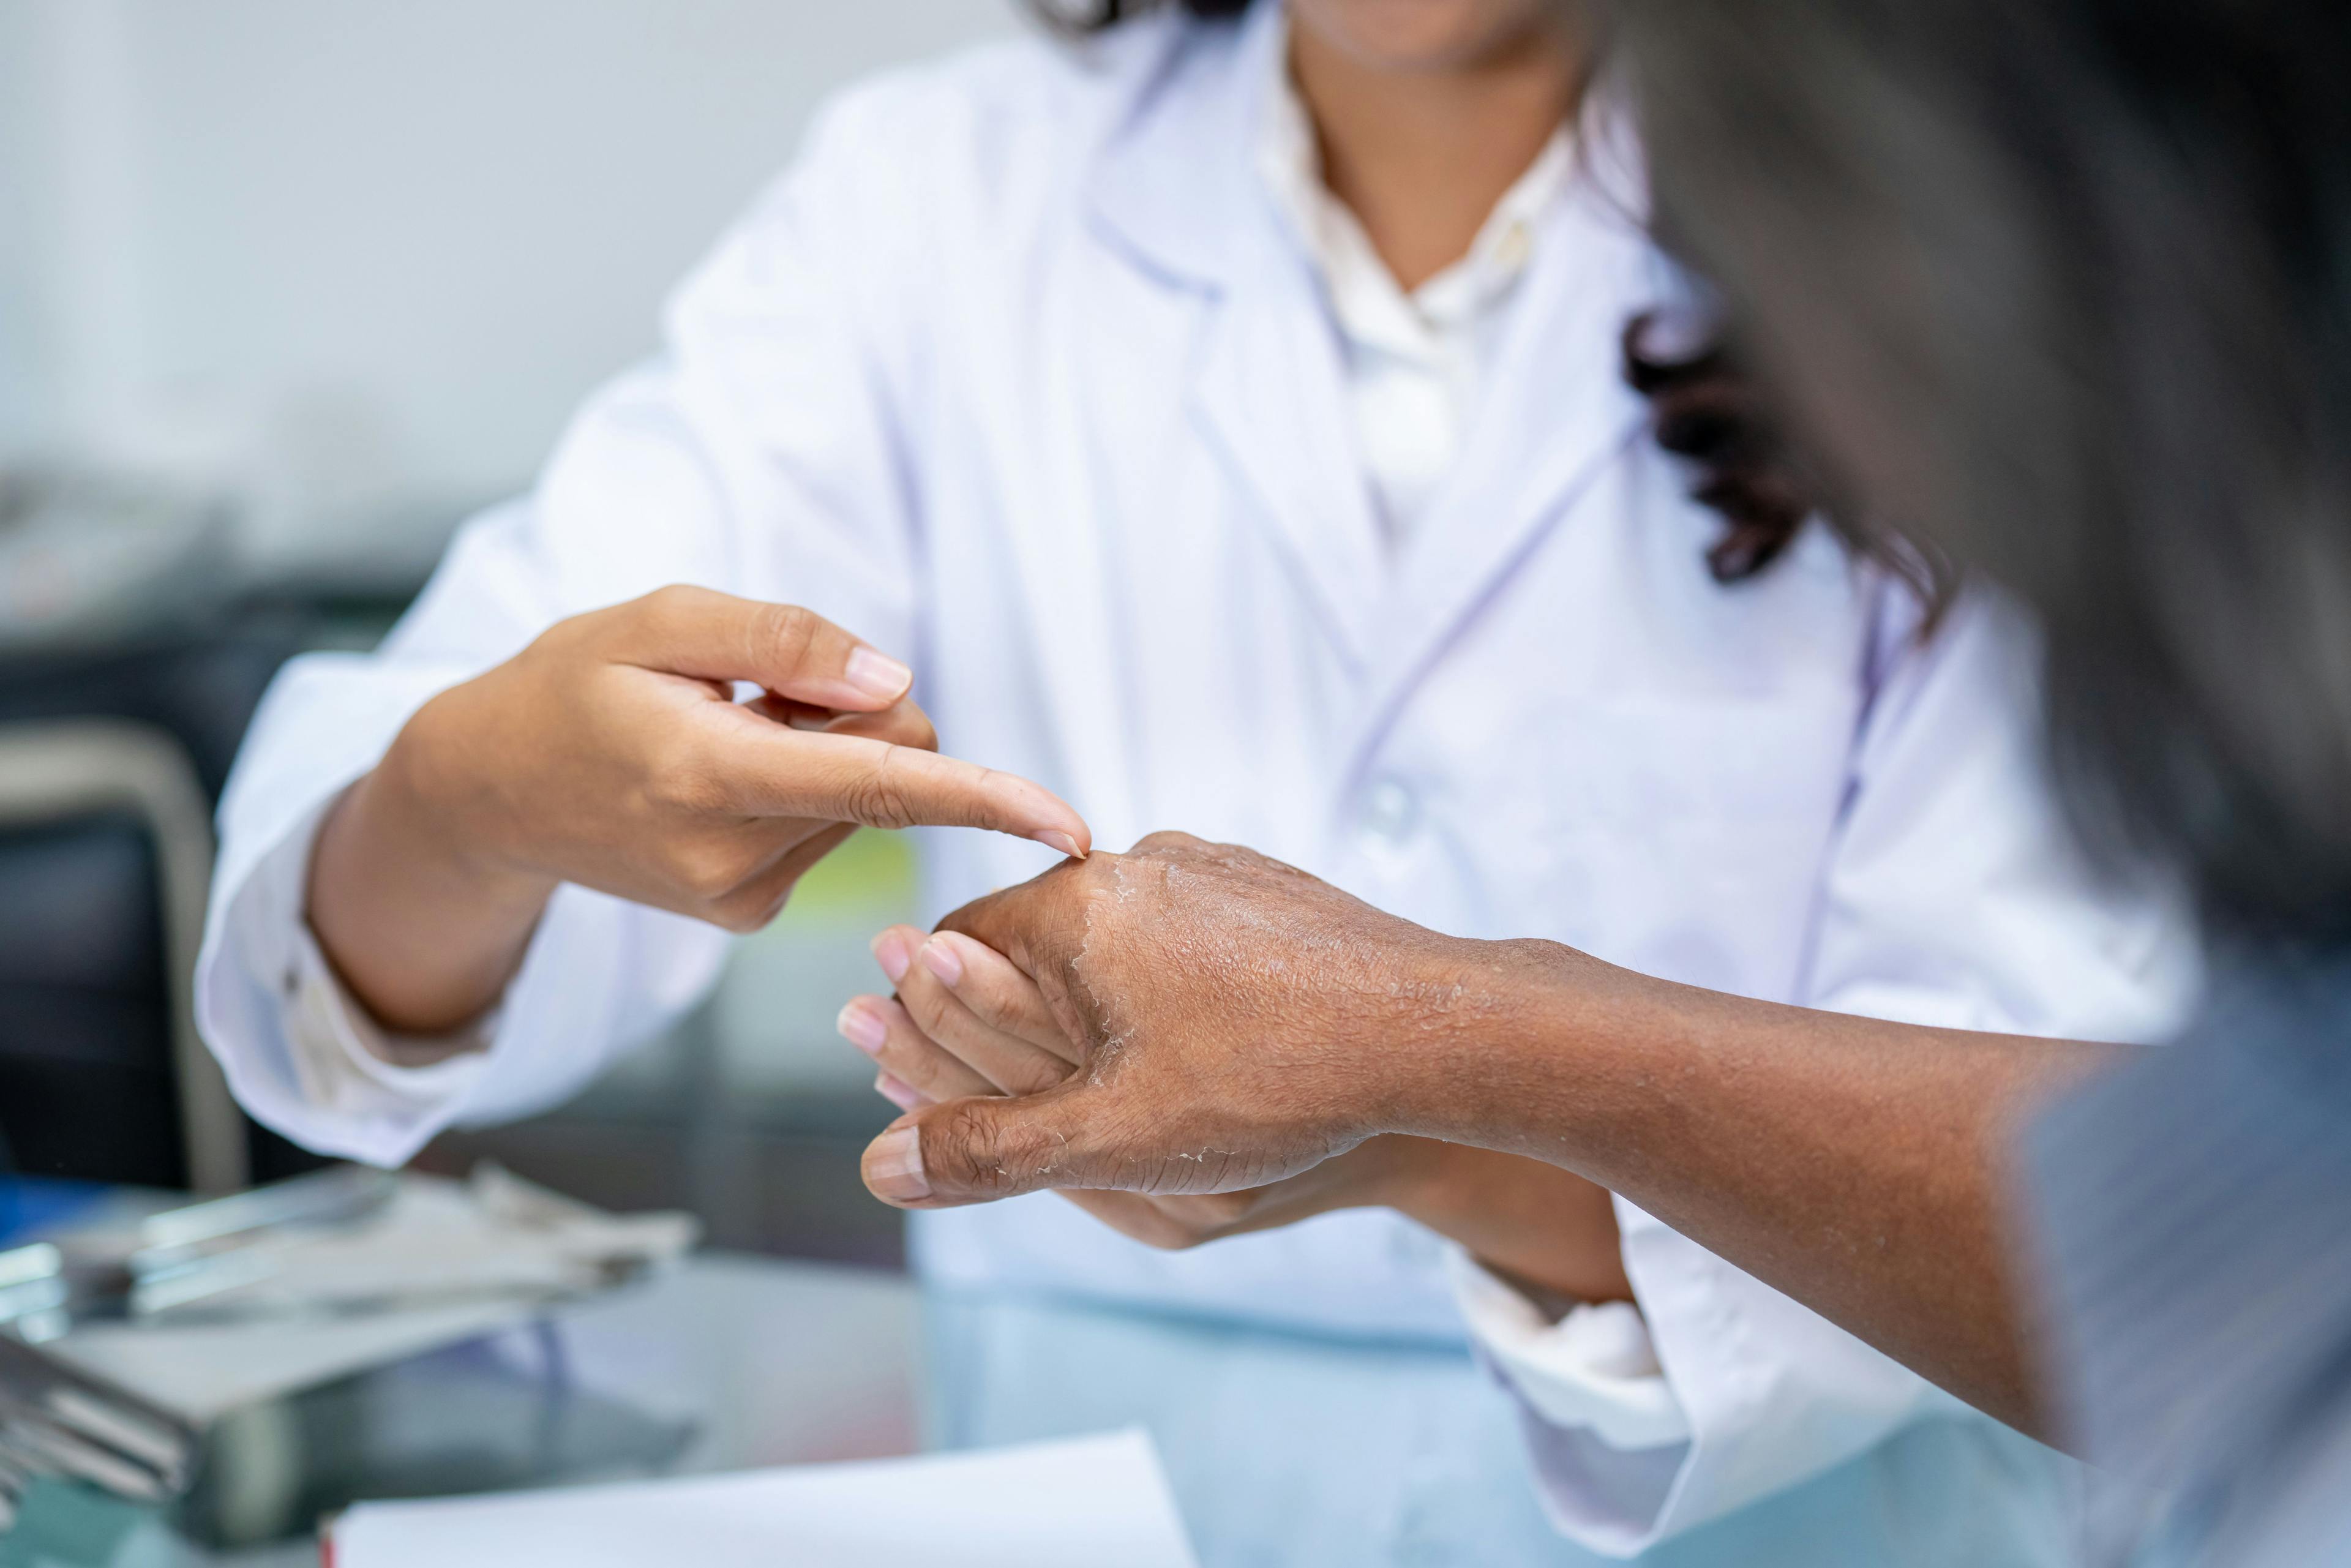 Doctor assesses patient with psoriasis | Image Credit: © CandyRetriever - stock.adobe.com